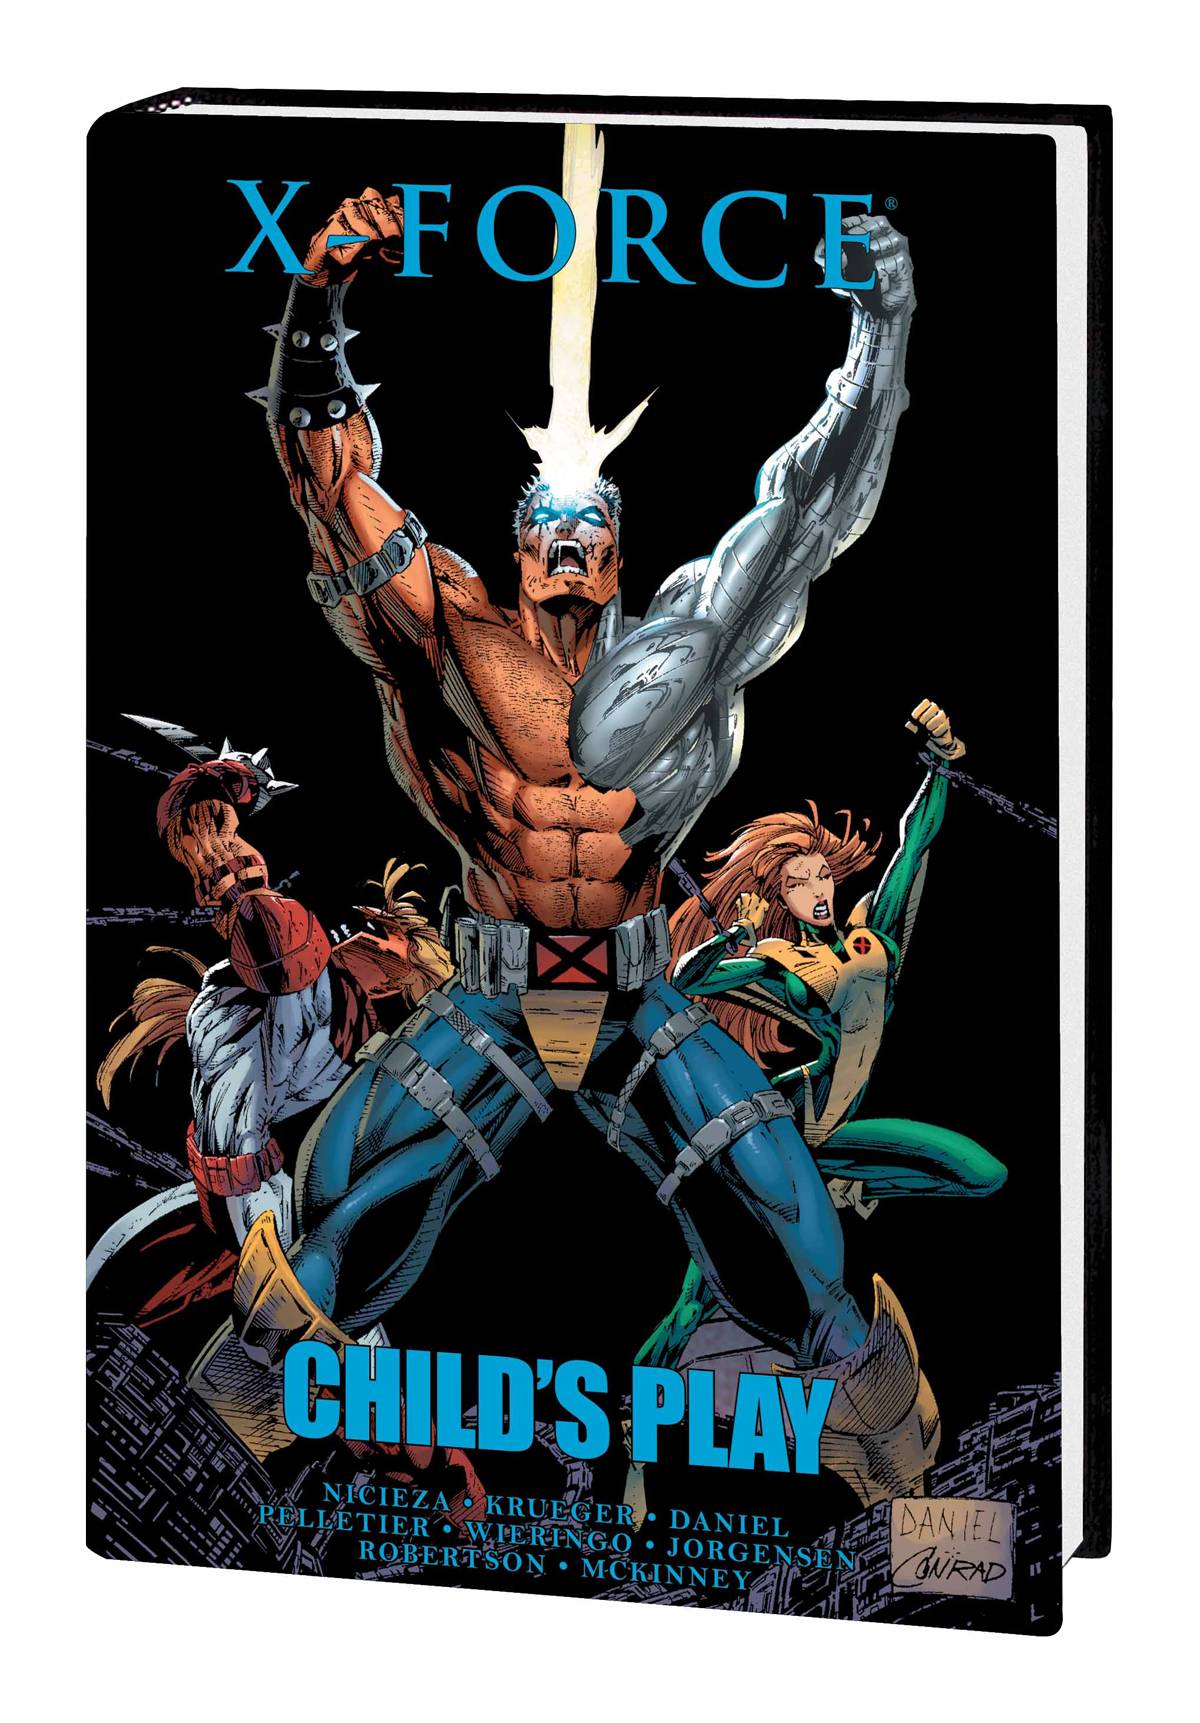 X-Force Childs Play Hardcover